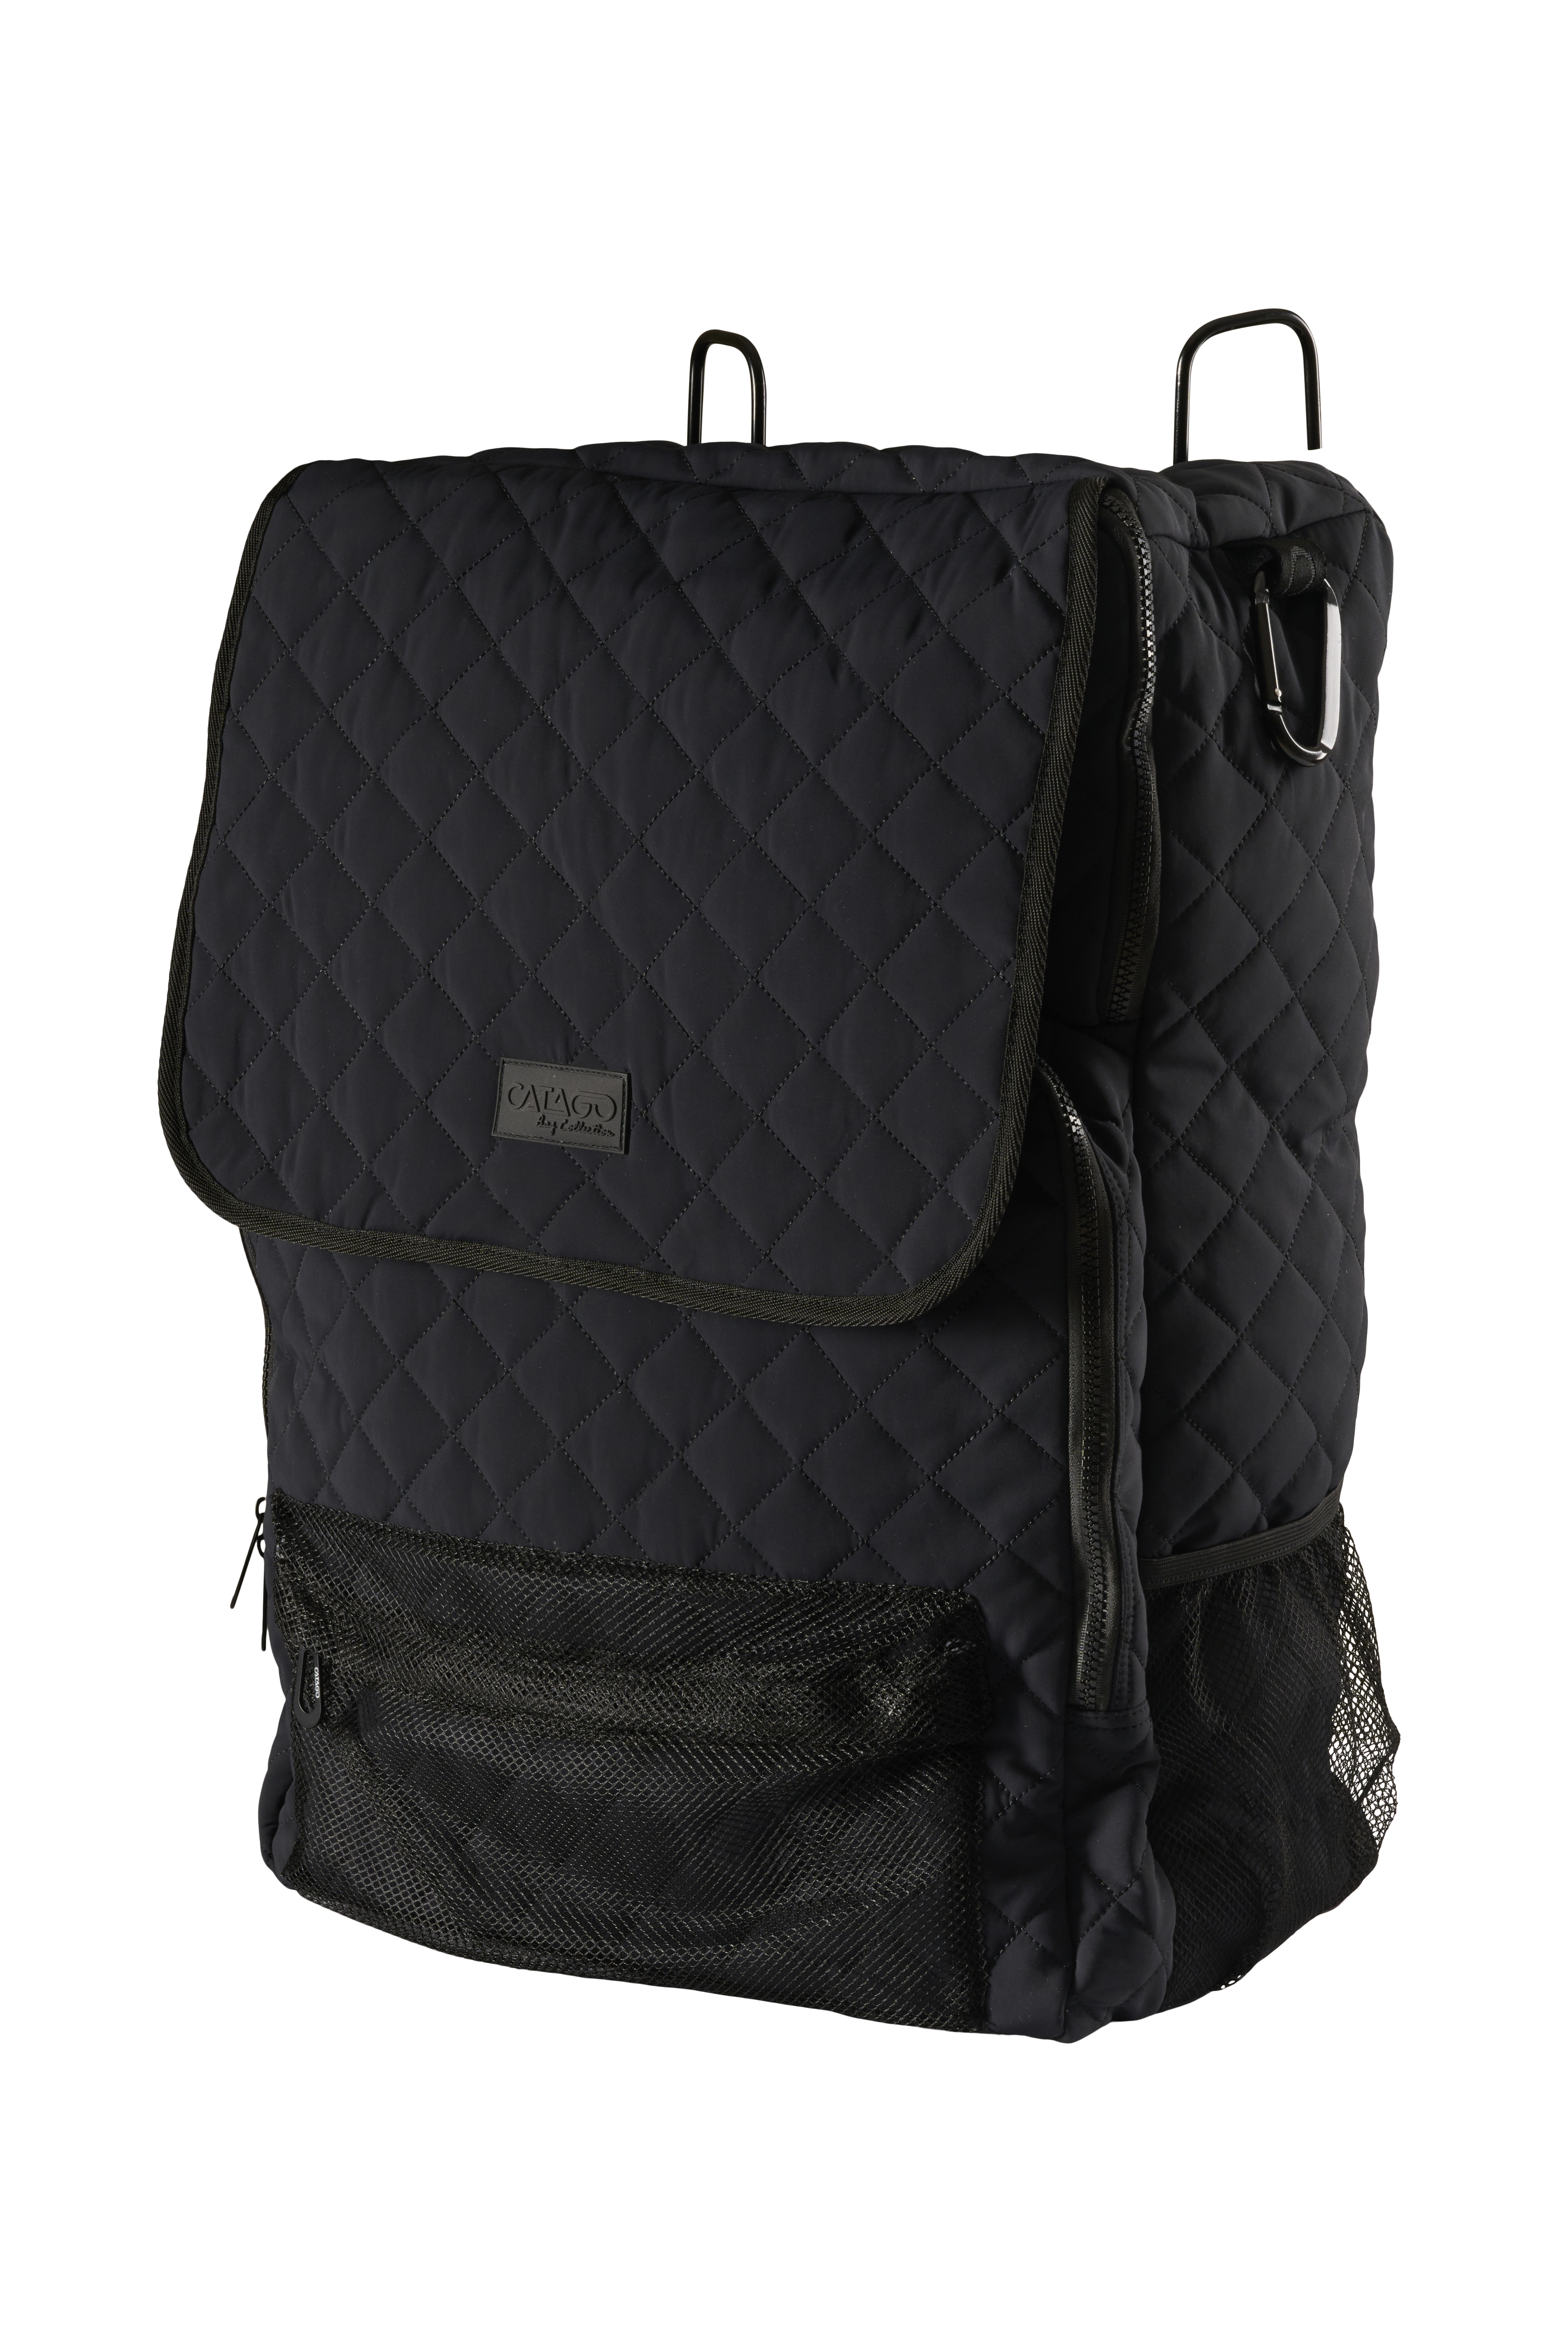 CATAGO Stable Bag Quilted With Hook - Black, Catago